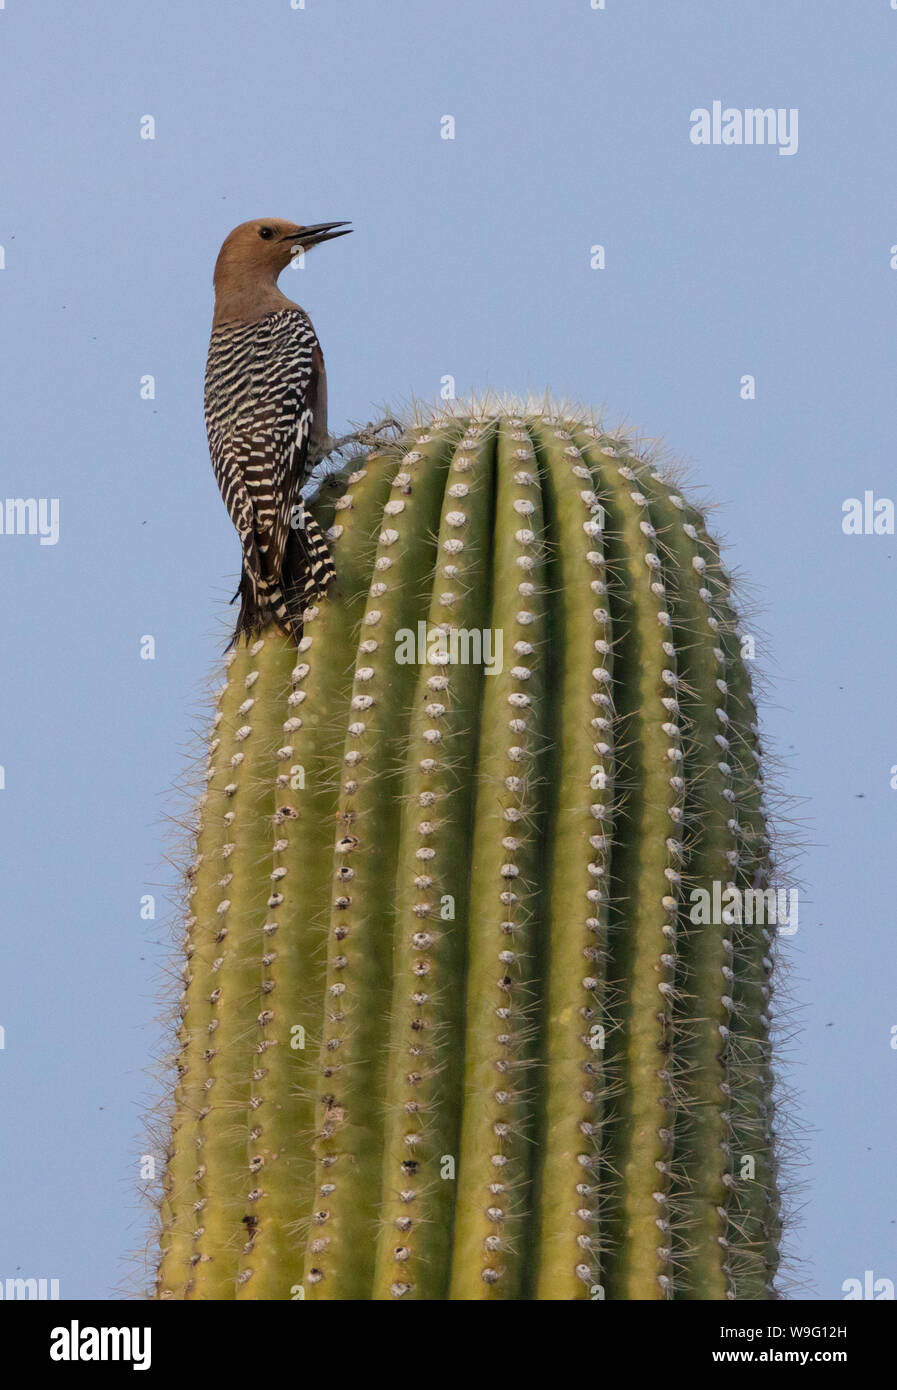 A Gila woodpecker (Melanerpes uropygialis) perches on the top of a Saguaro cactus at Catalina State Park in Arizona Stock Photo